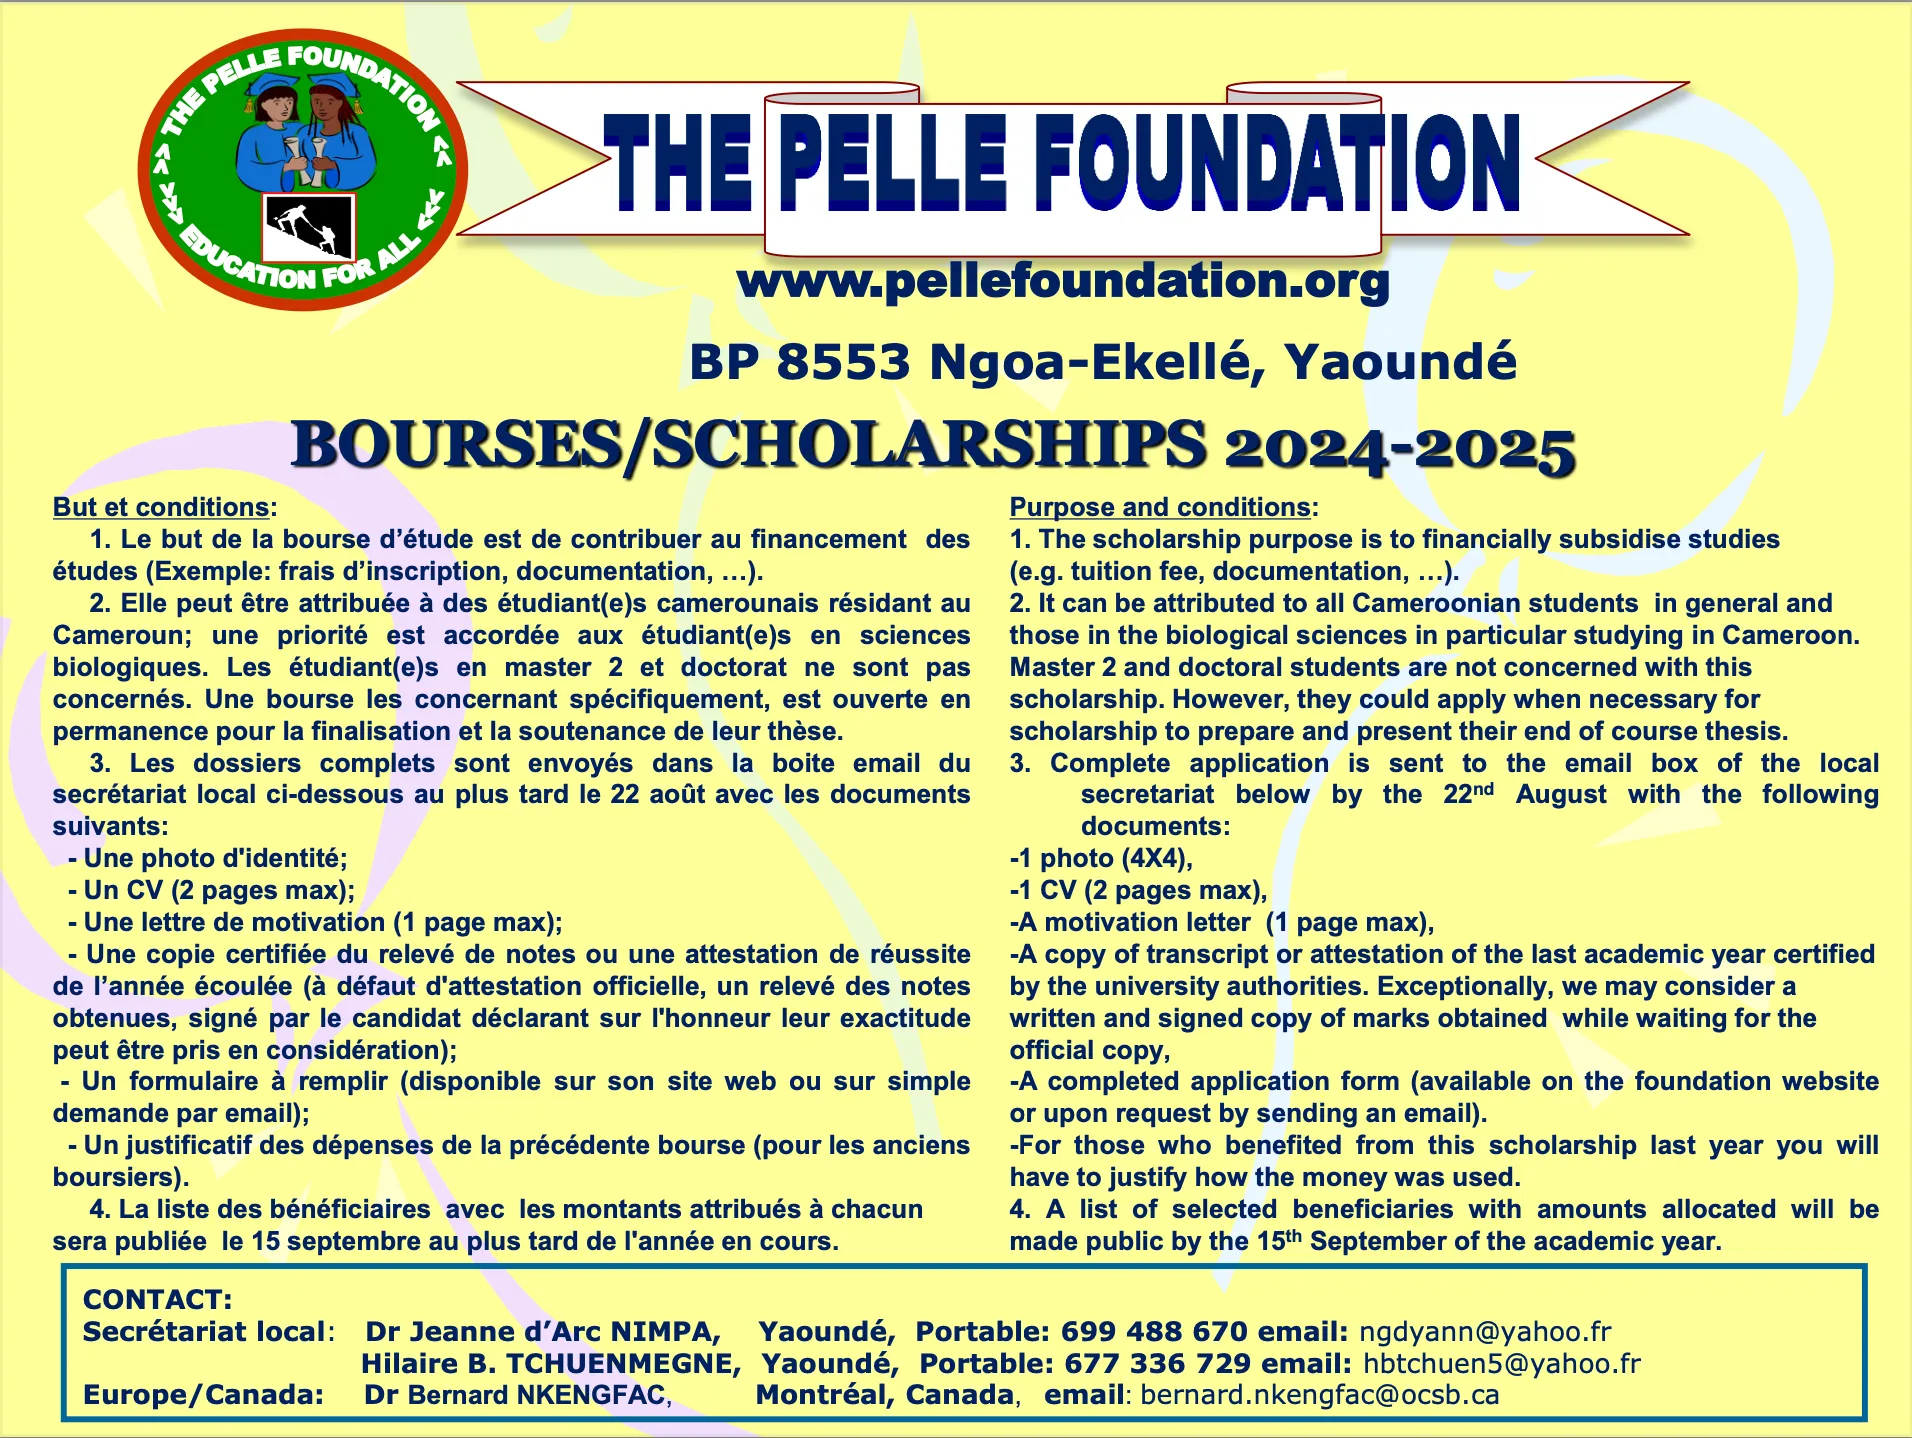 About the scholarships